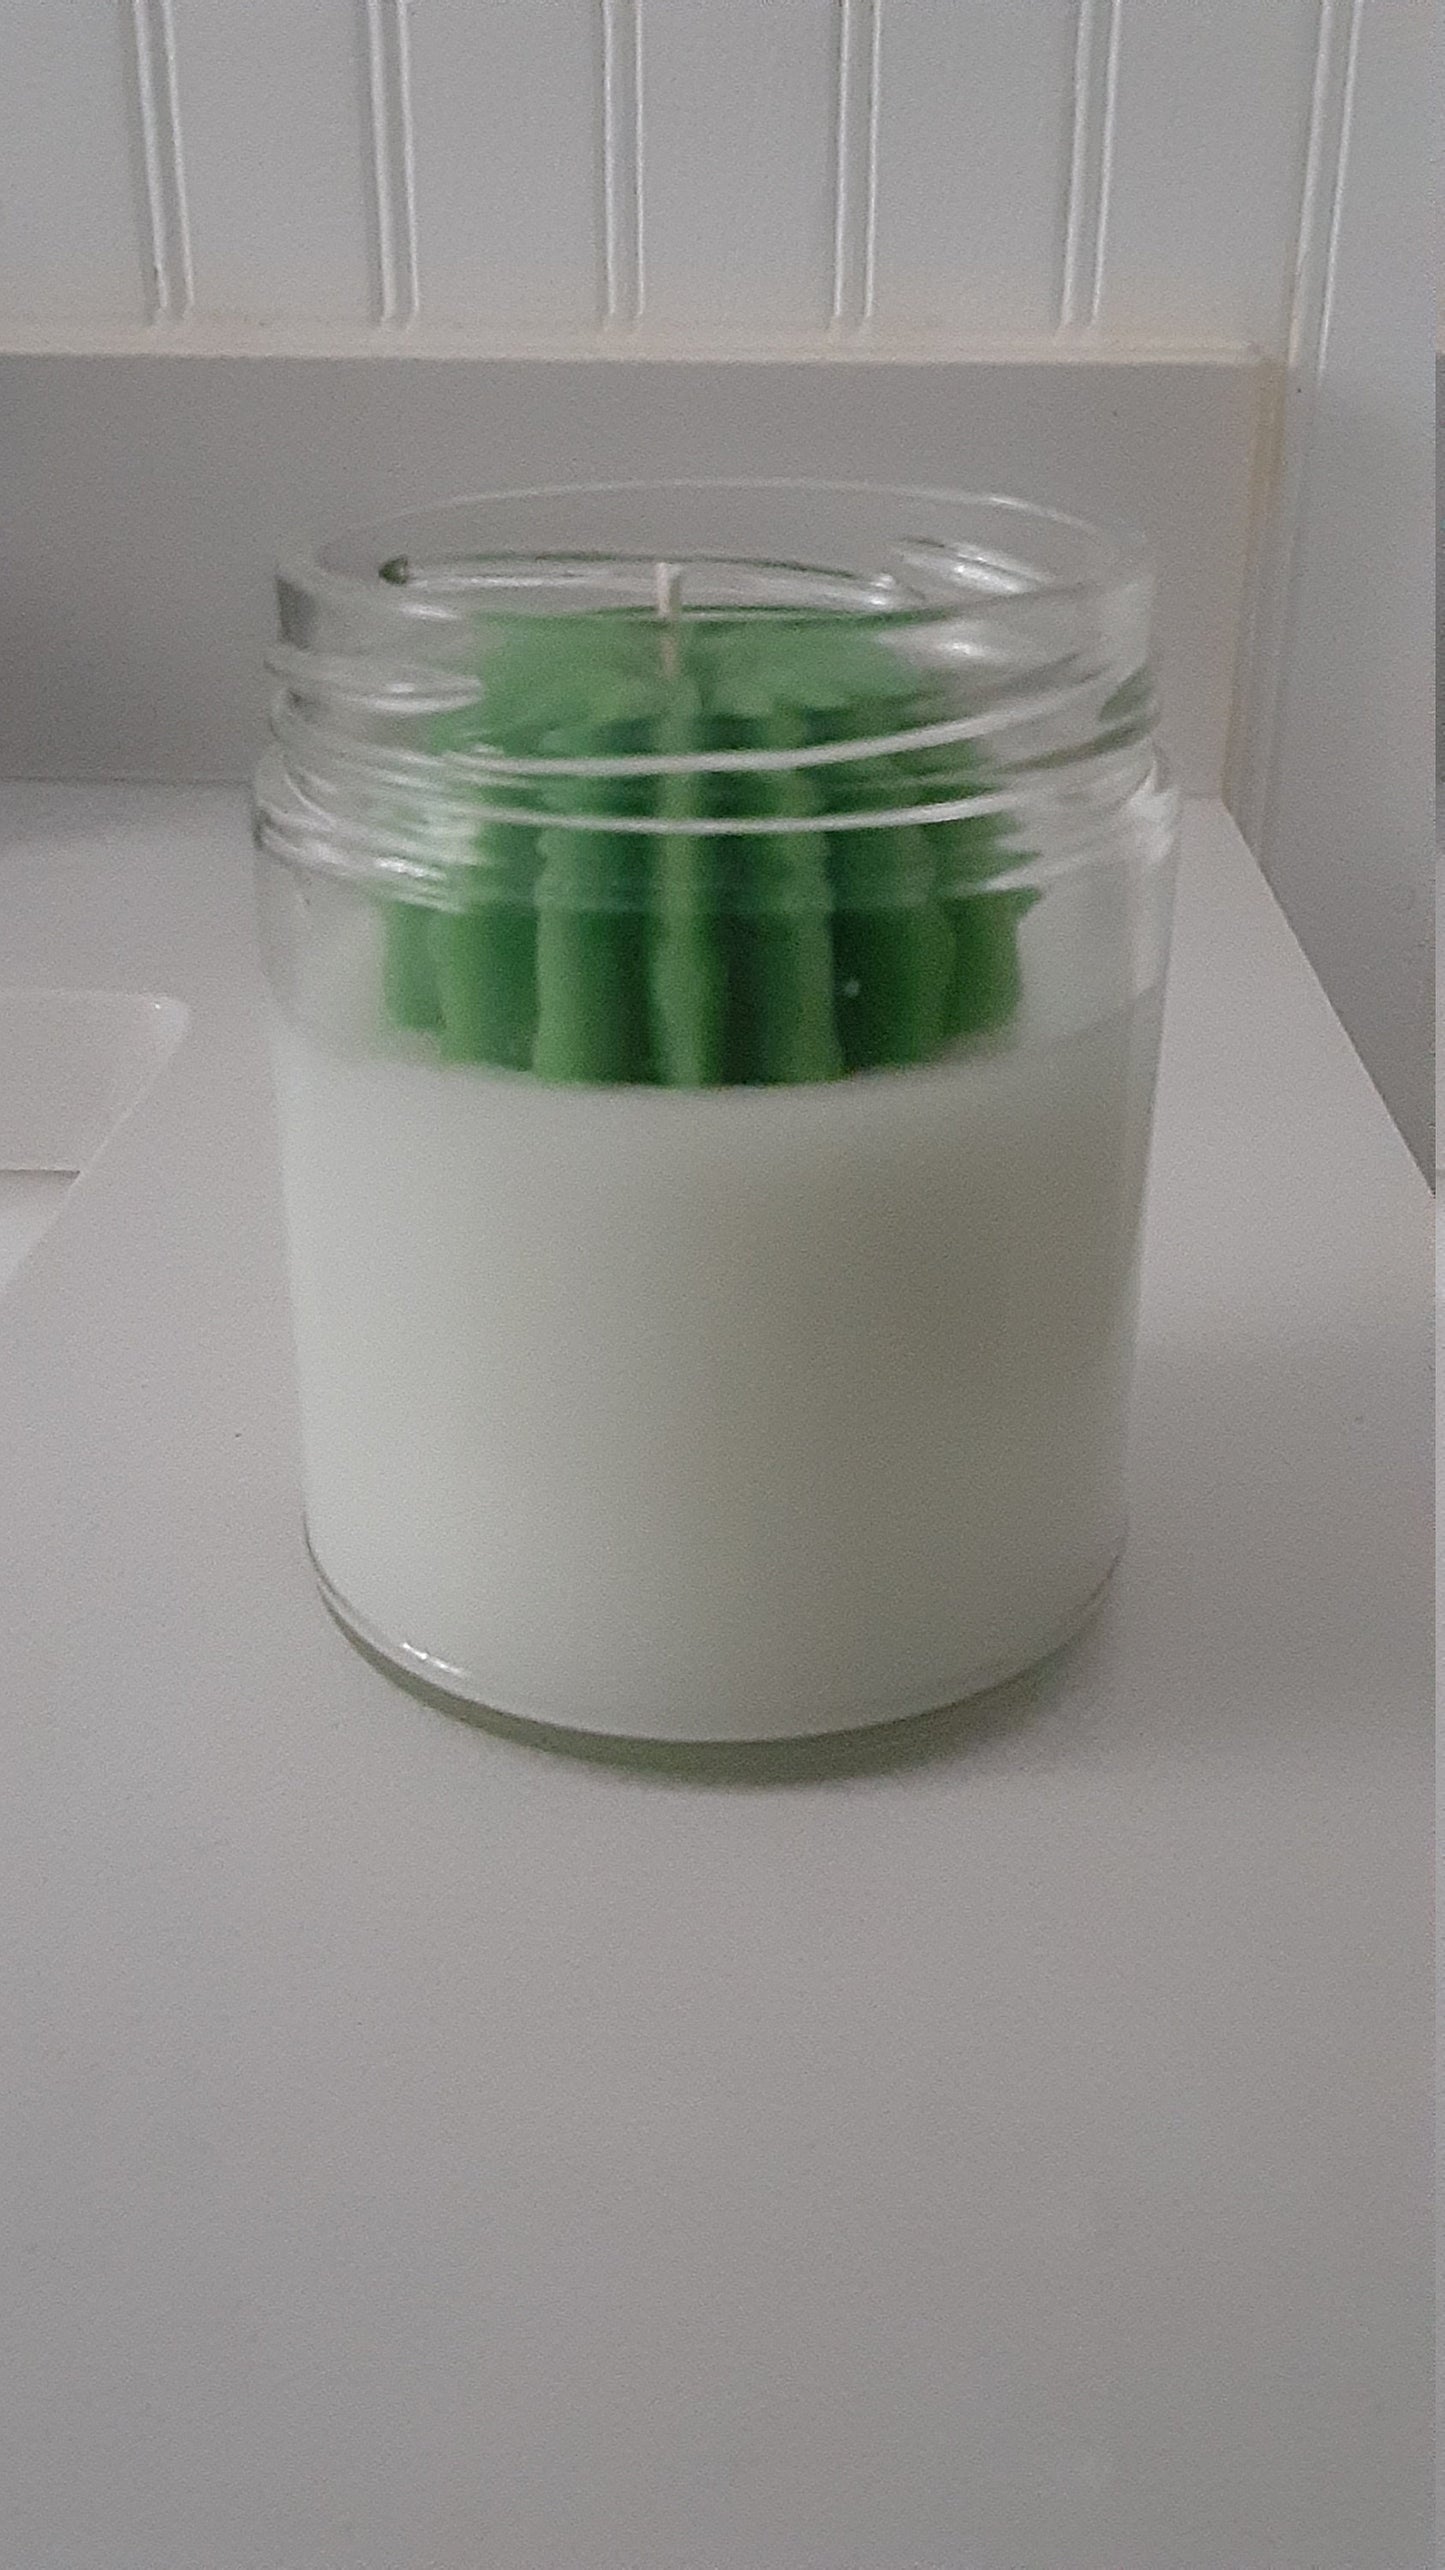 Cactus Flower Jade homemade Candles 8oz and 6oz succulent or cactus candle - spring decor